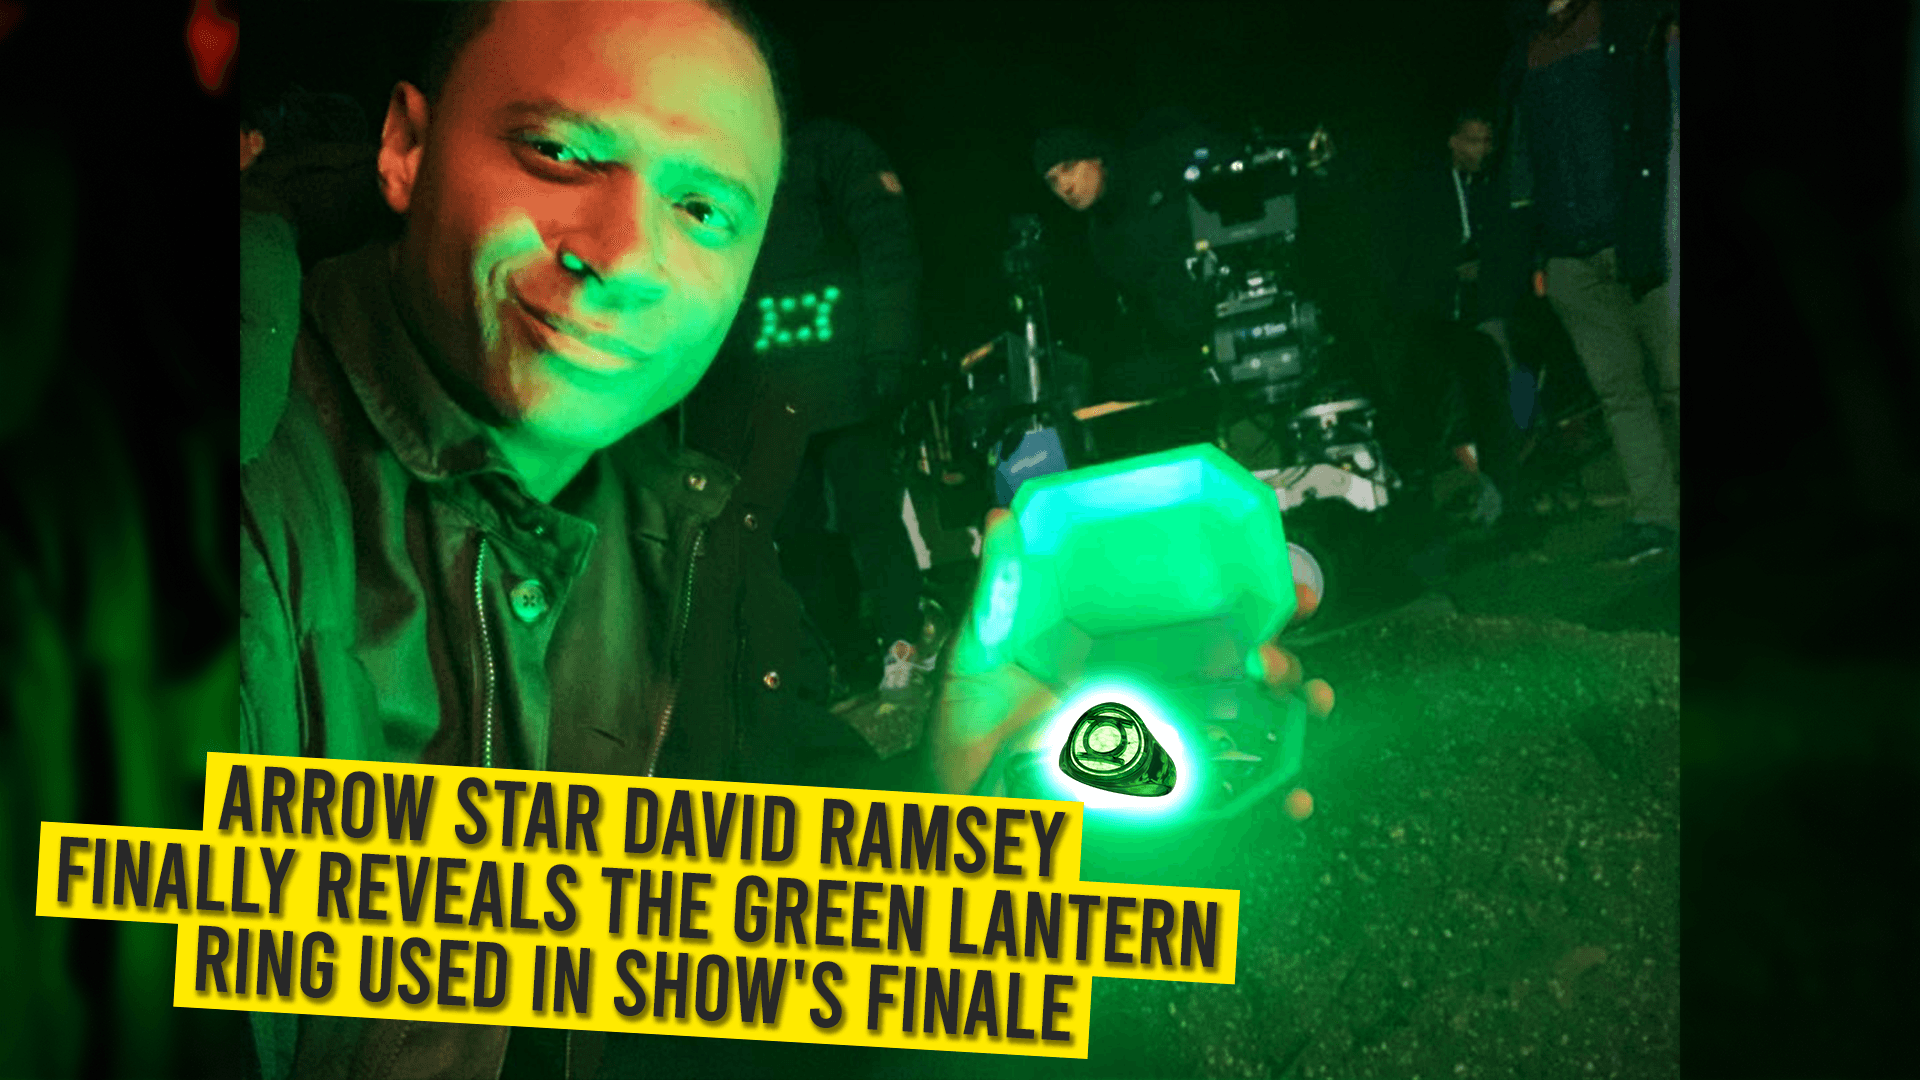 Arrow Star David Ramsey Finally Reveals The Green Lantern Ring Used In Show’s Finale